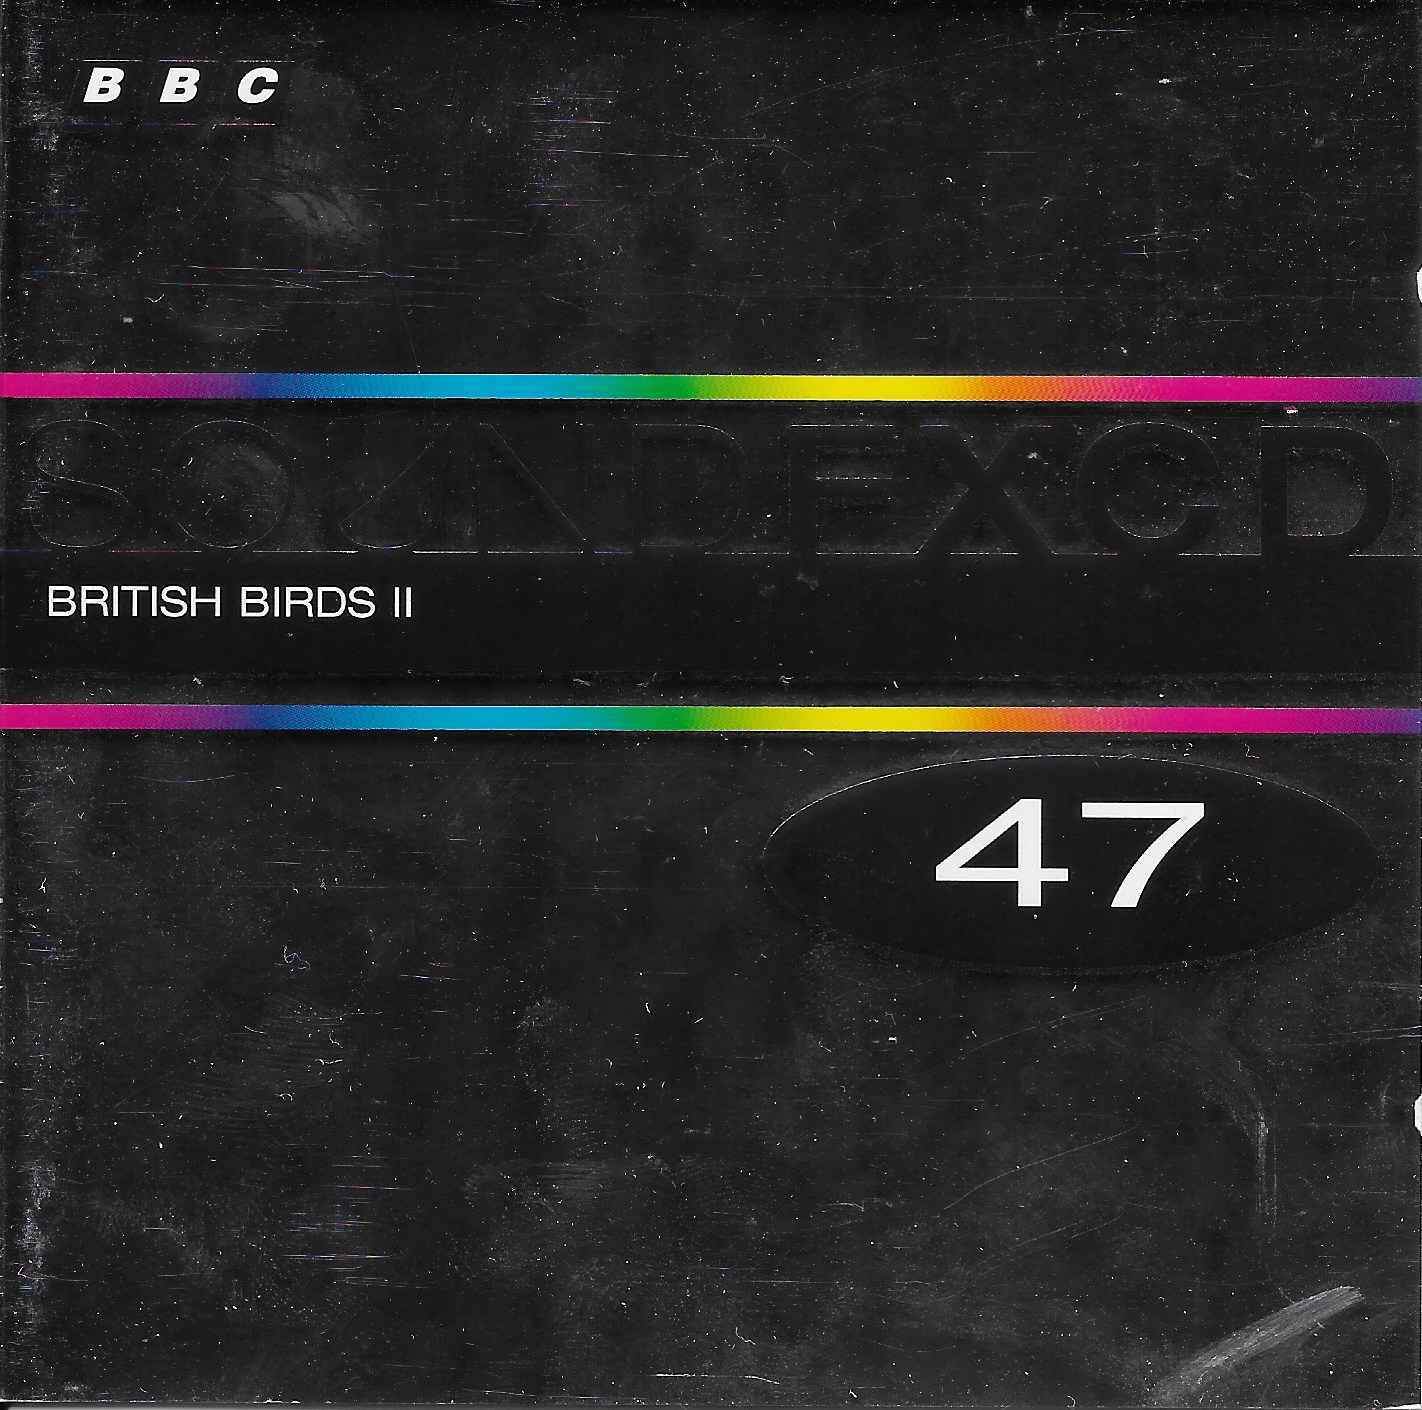 Picture of BBCCD SFX047 British birds by artist Various from the BBC records and Tapes library